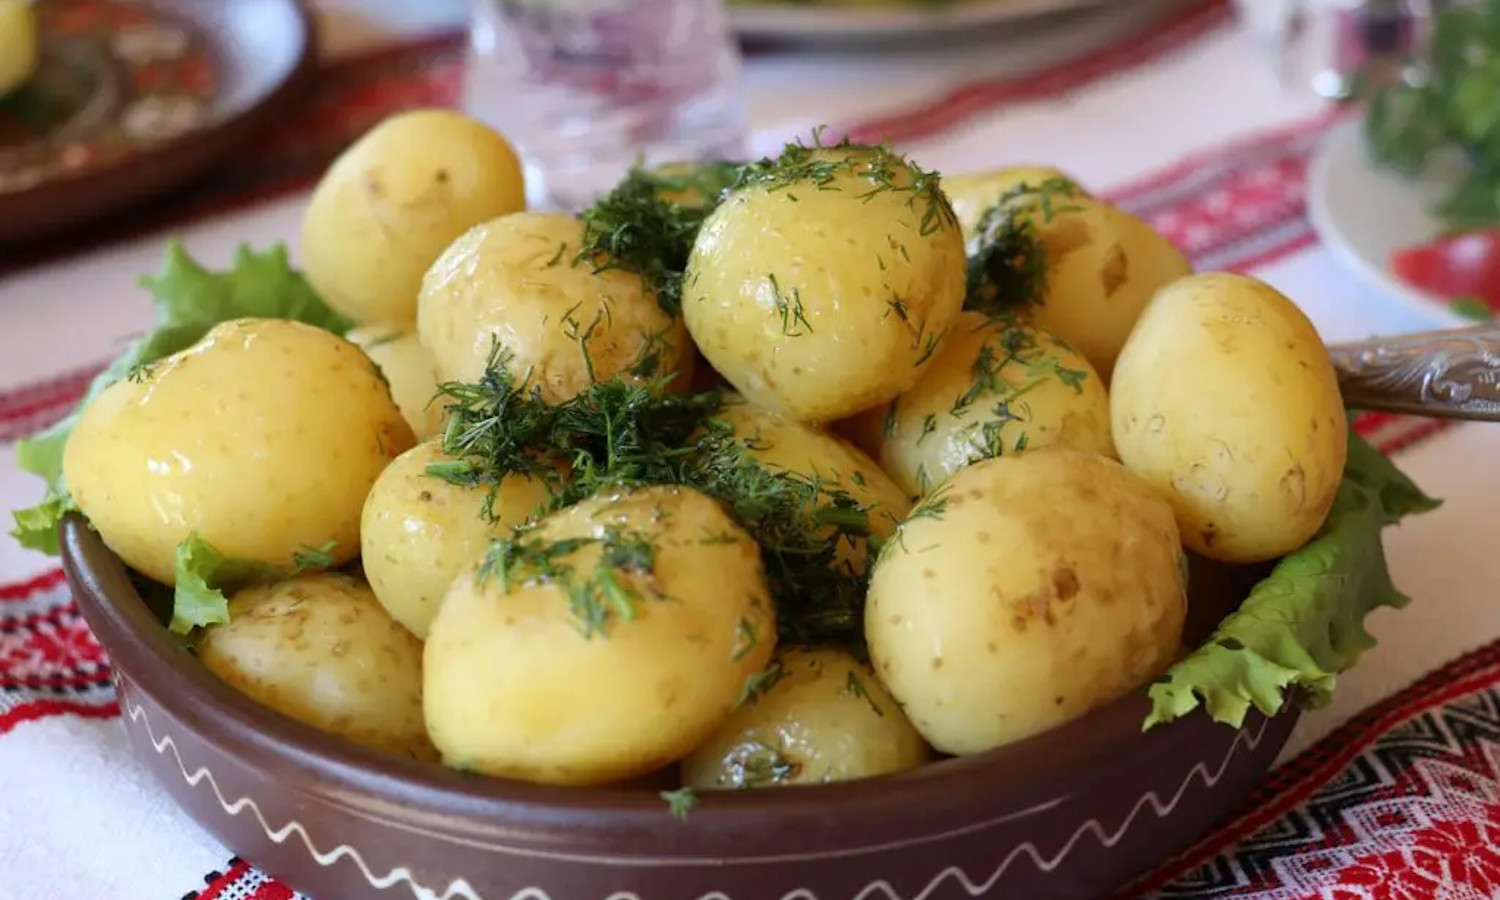 The little-known danger of rotten potatoes - It releases a deadly gas that kills in minutes!